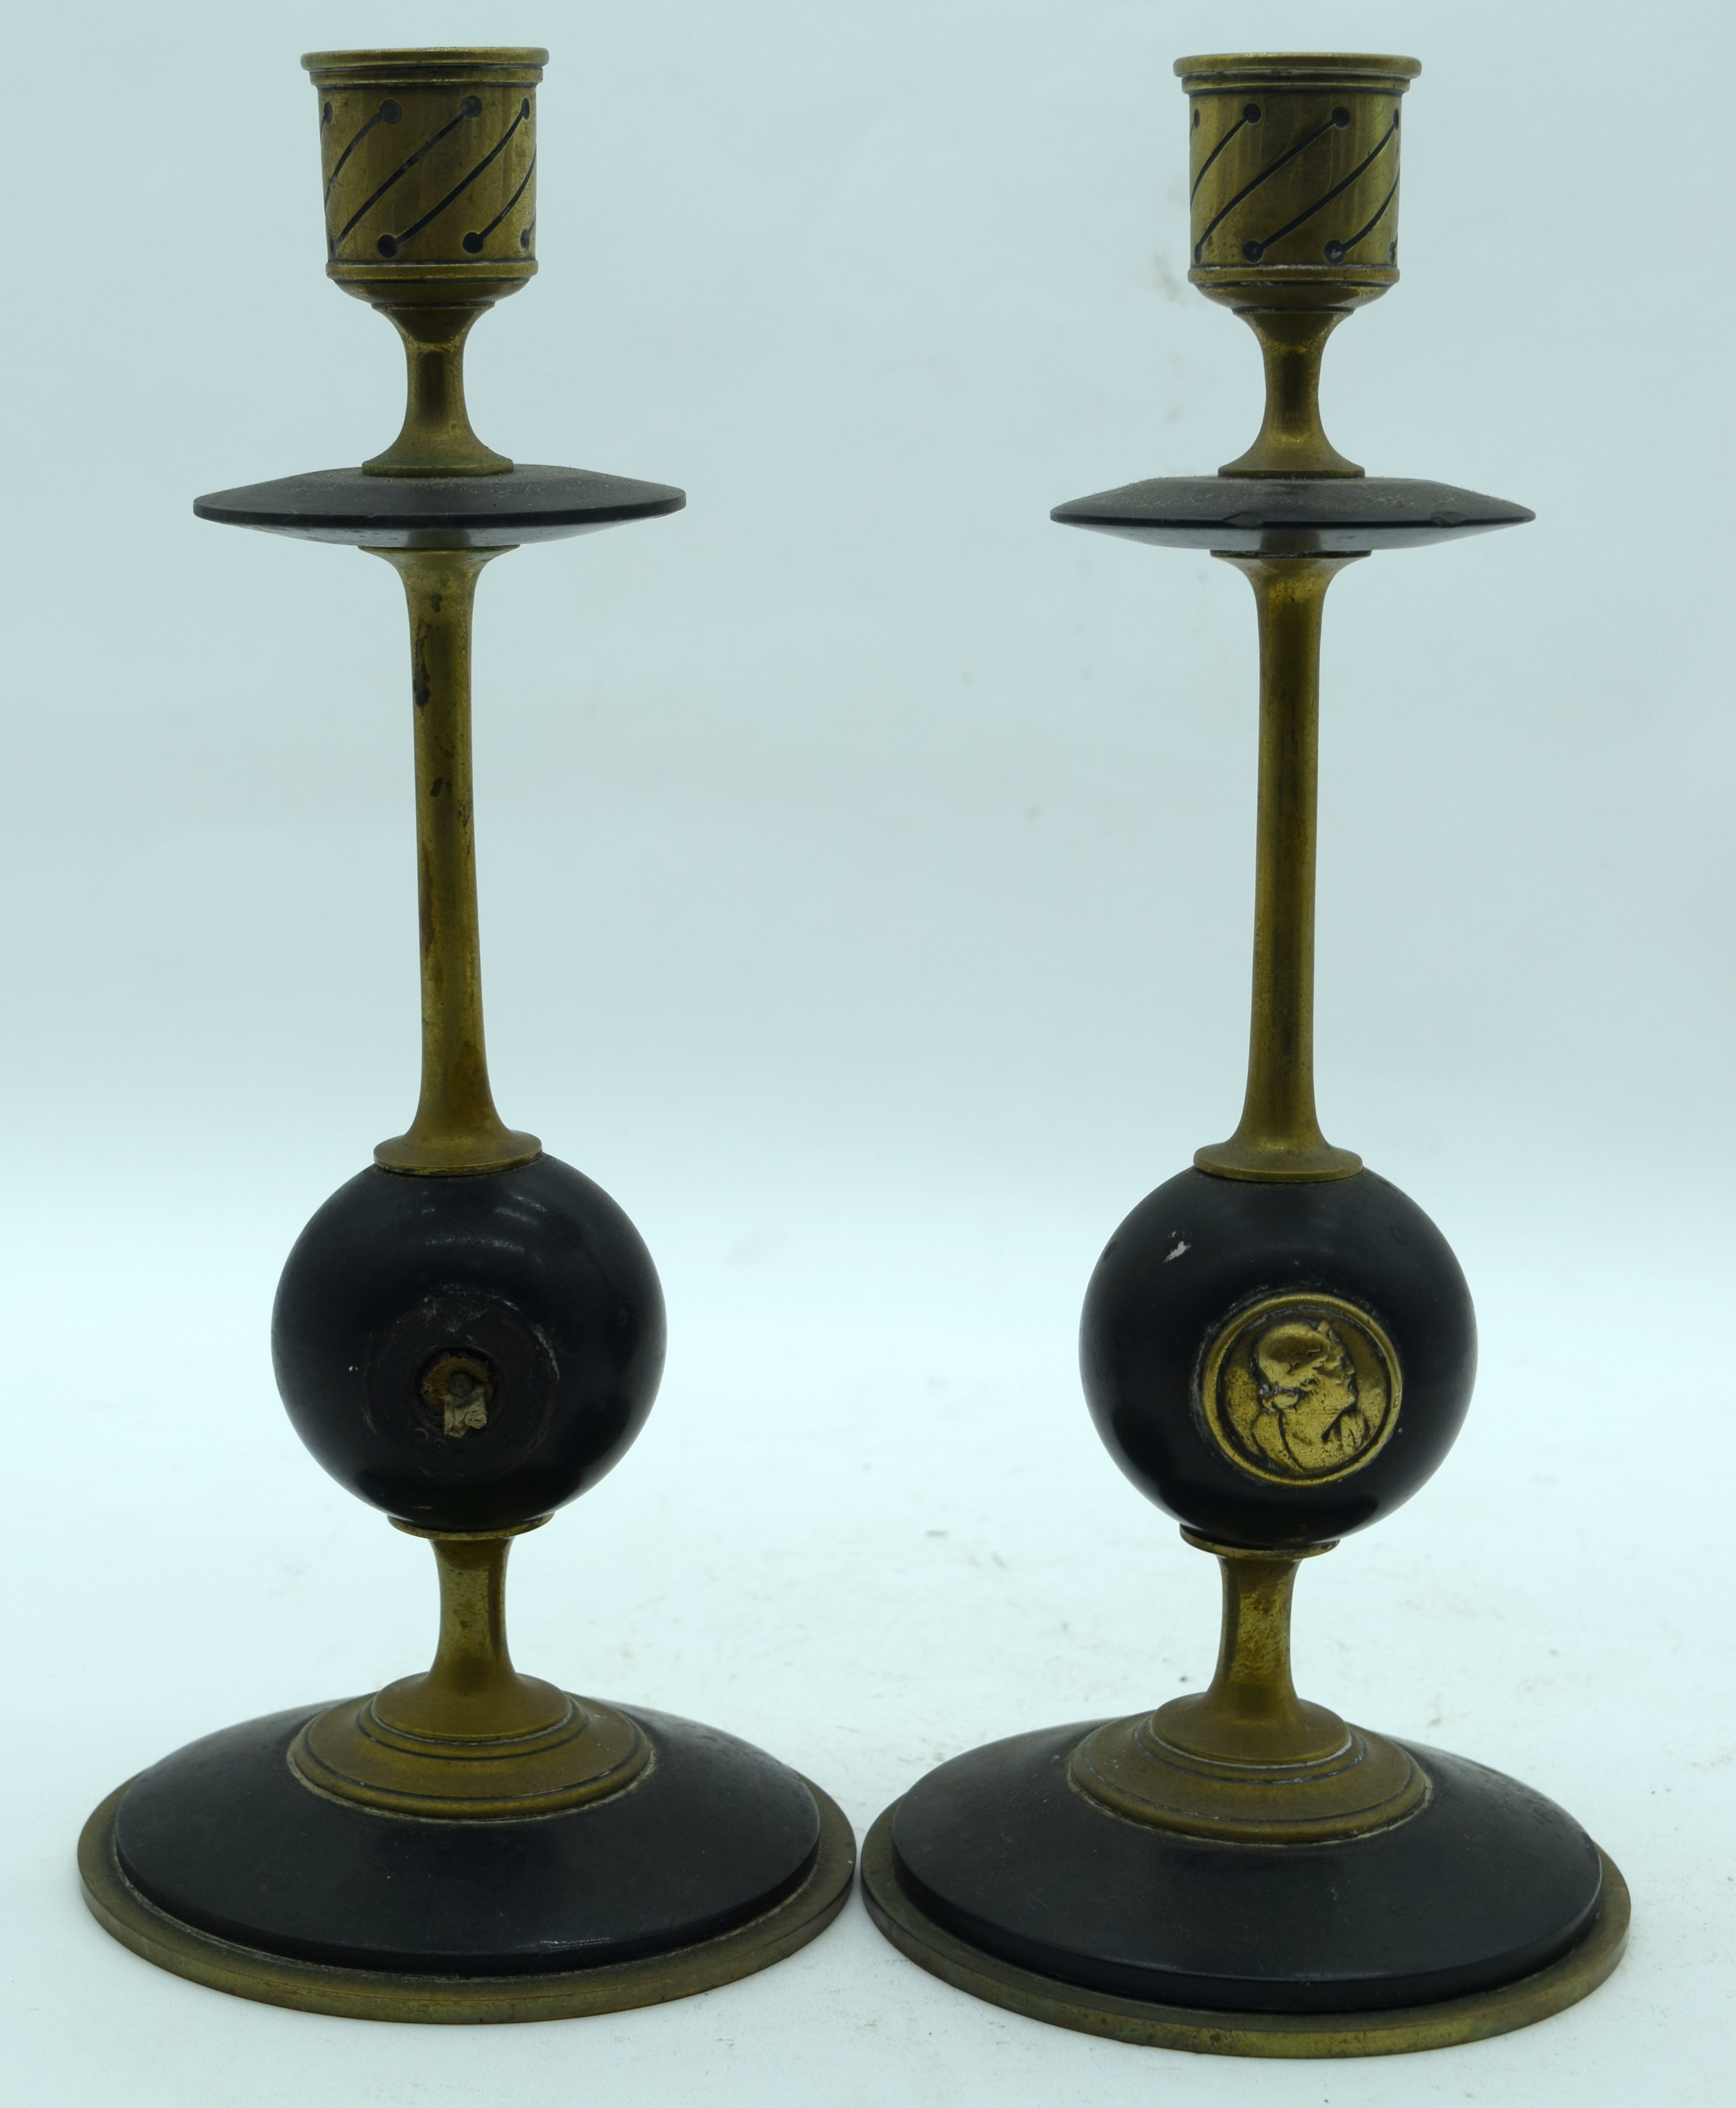 A PAIR OF 19TH CENTURY FRENCH BRASS CANDLESTICKS decorated with portraits. 27 cm high. - Image 2 of 3